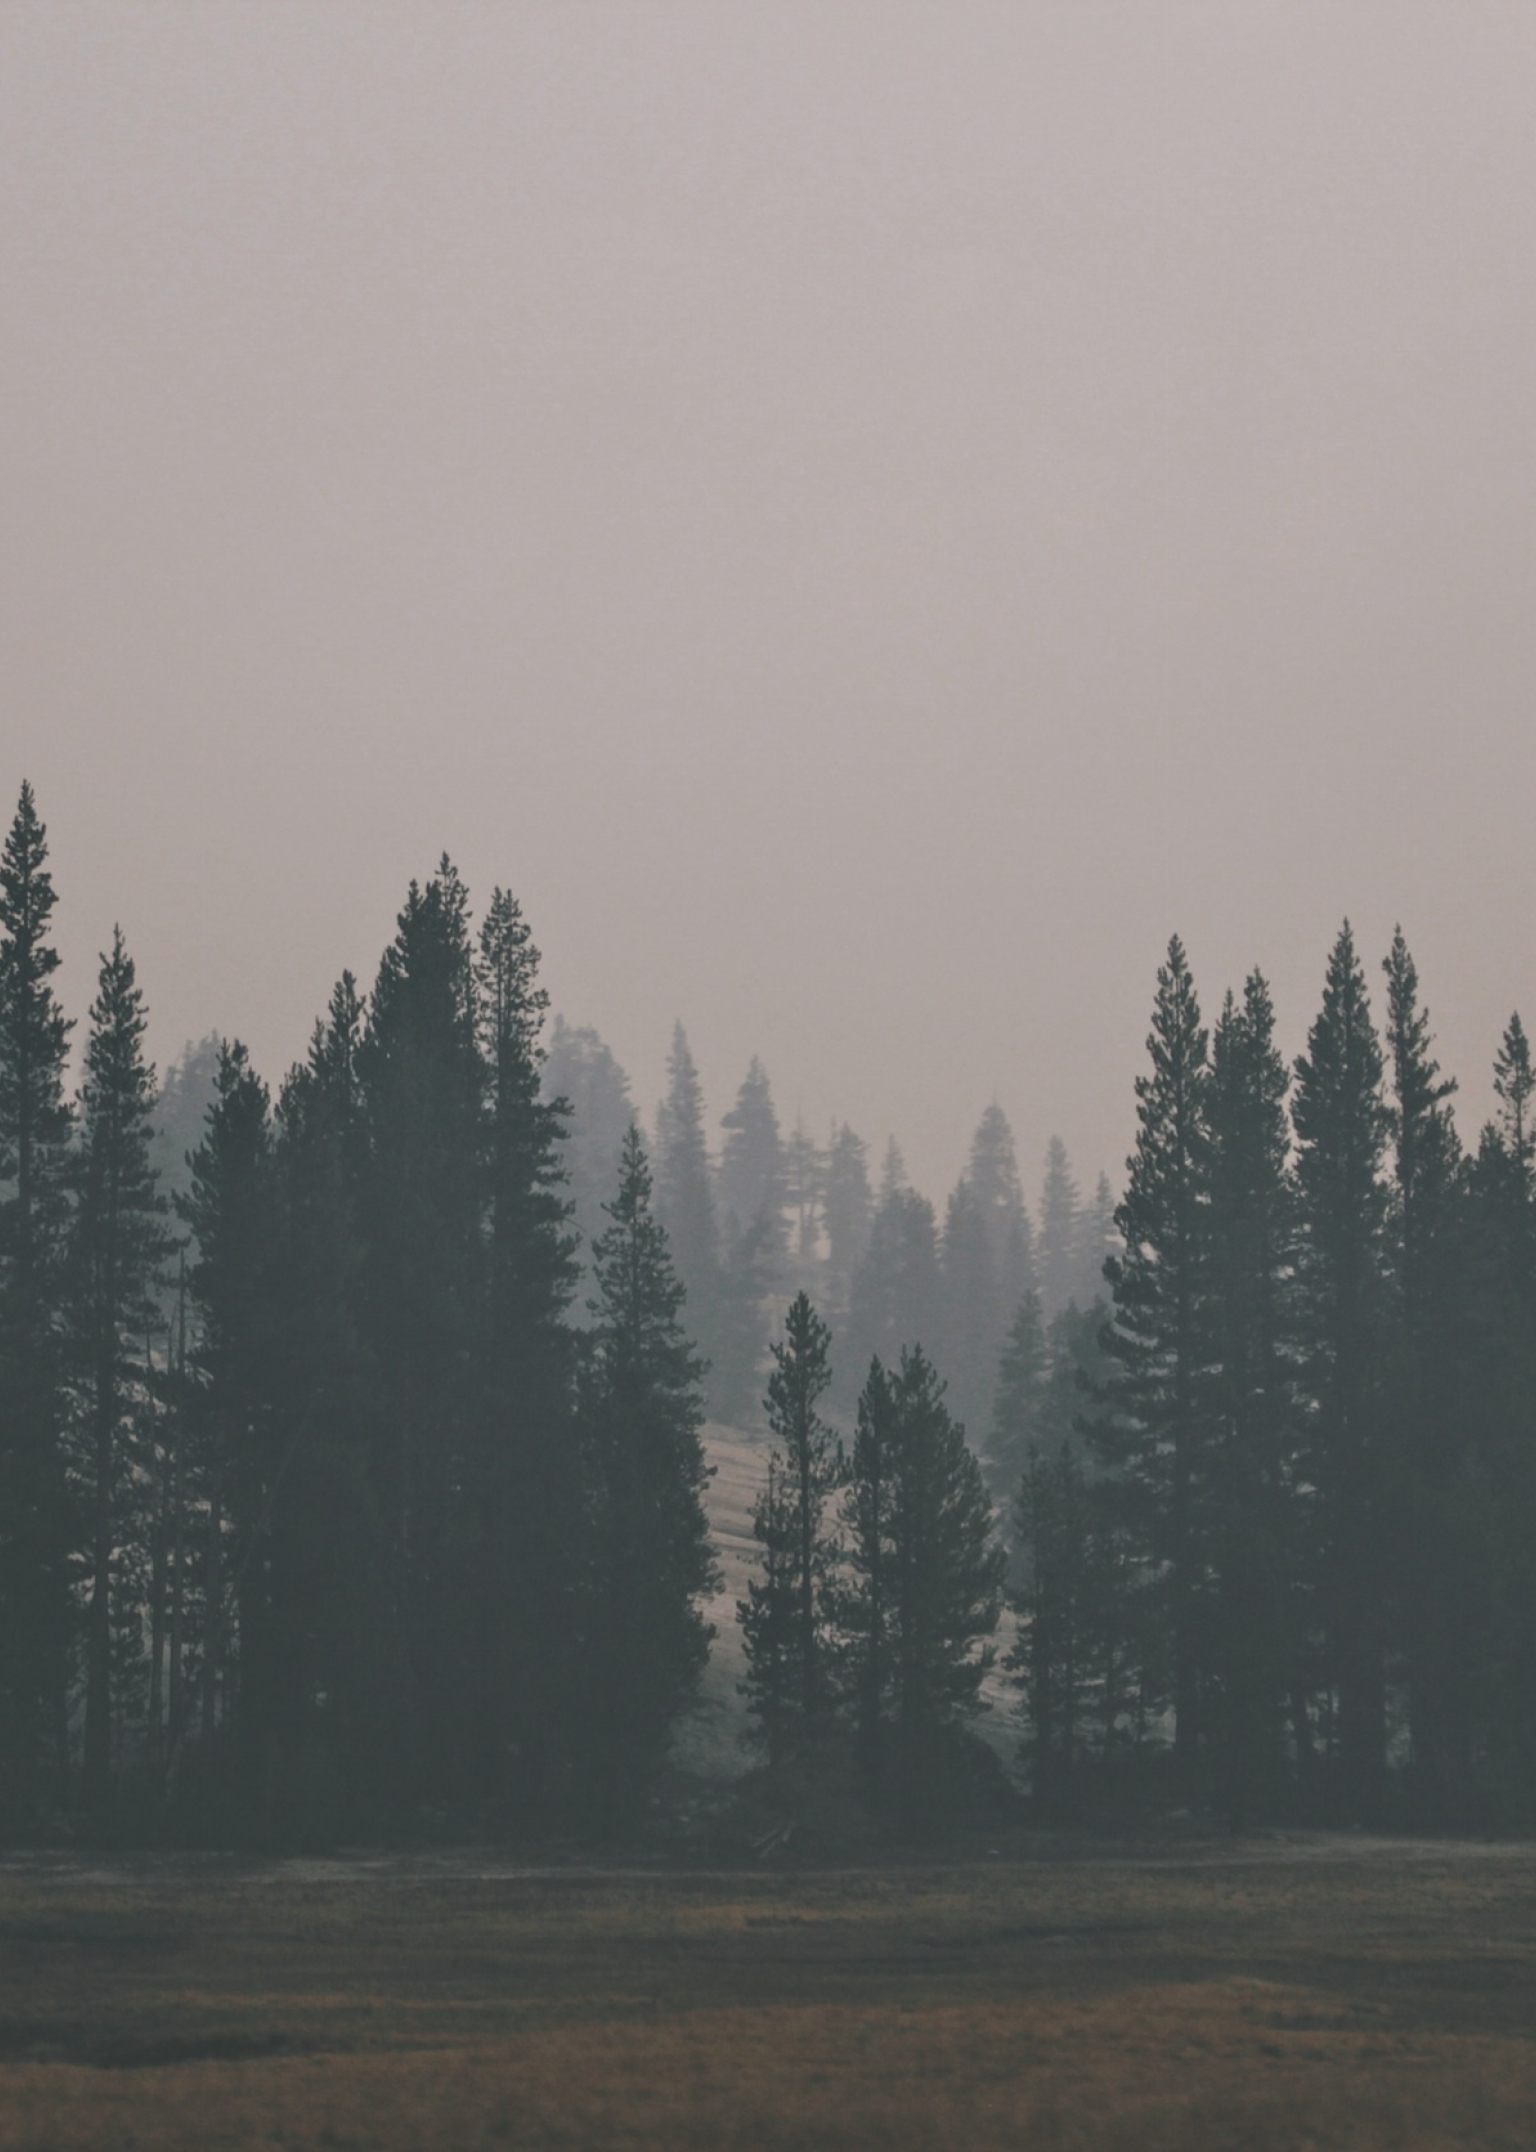 A foggy forest with pine trees in the foreground. - Fog